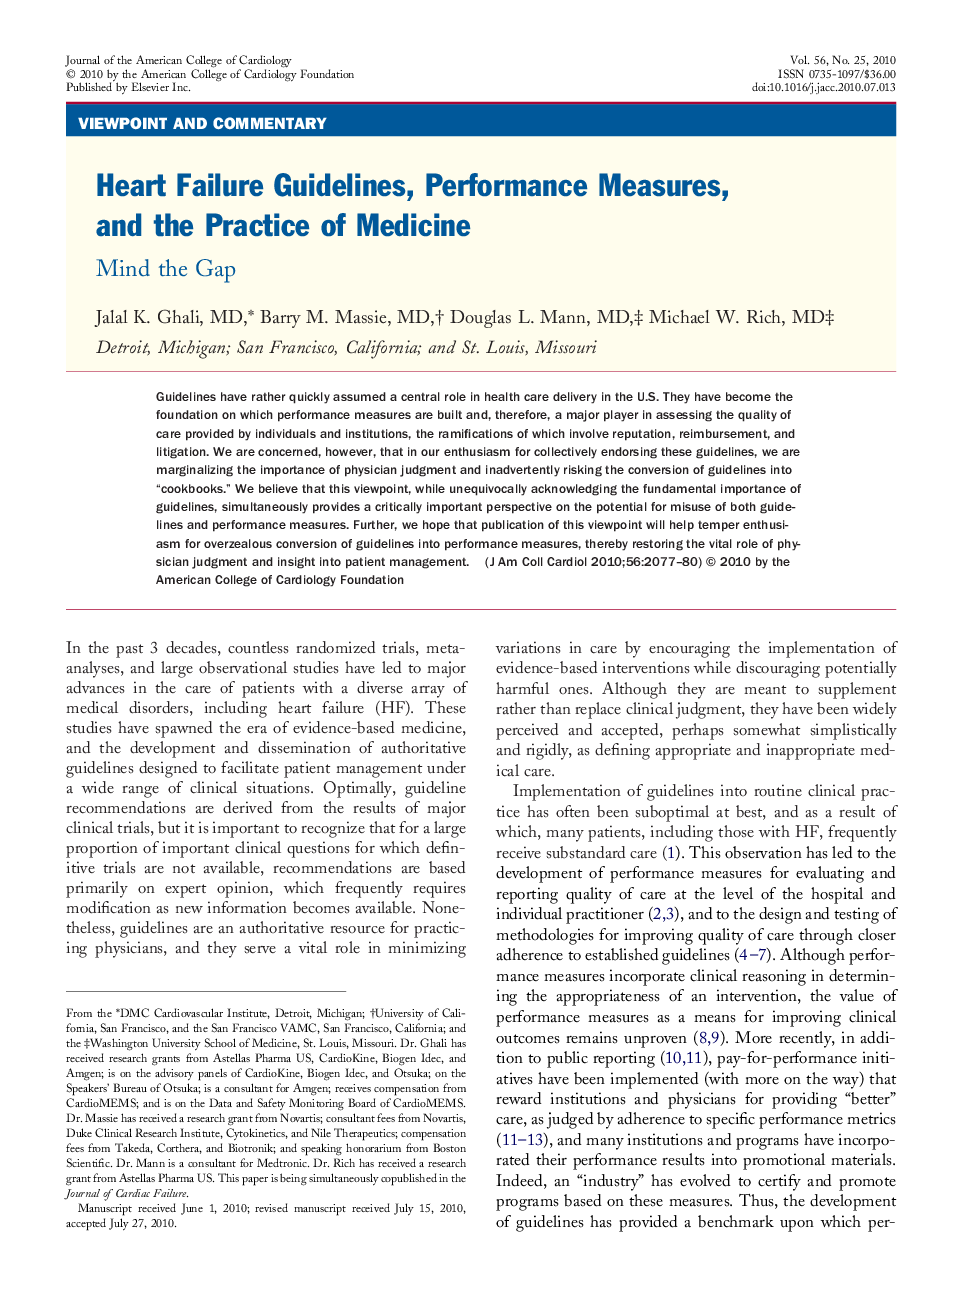 Heart Failure Guidelines, Performance Measures, and the Practice of Medicine : Mind the Gap